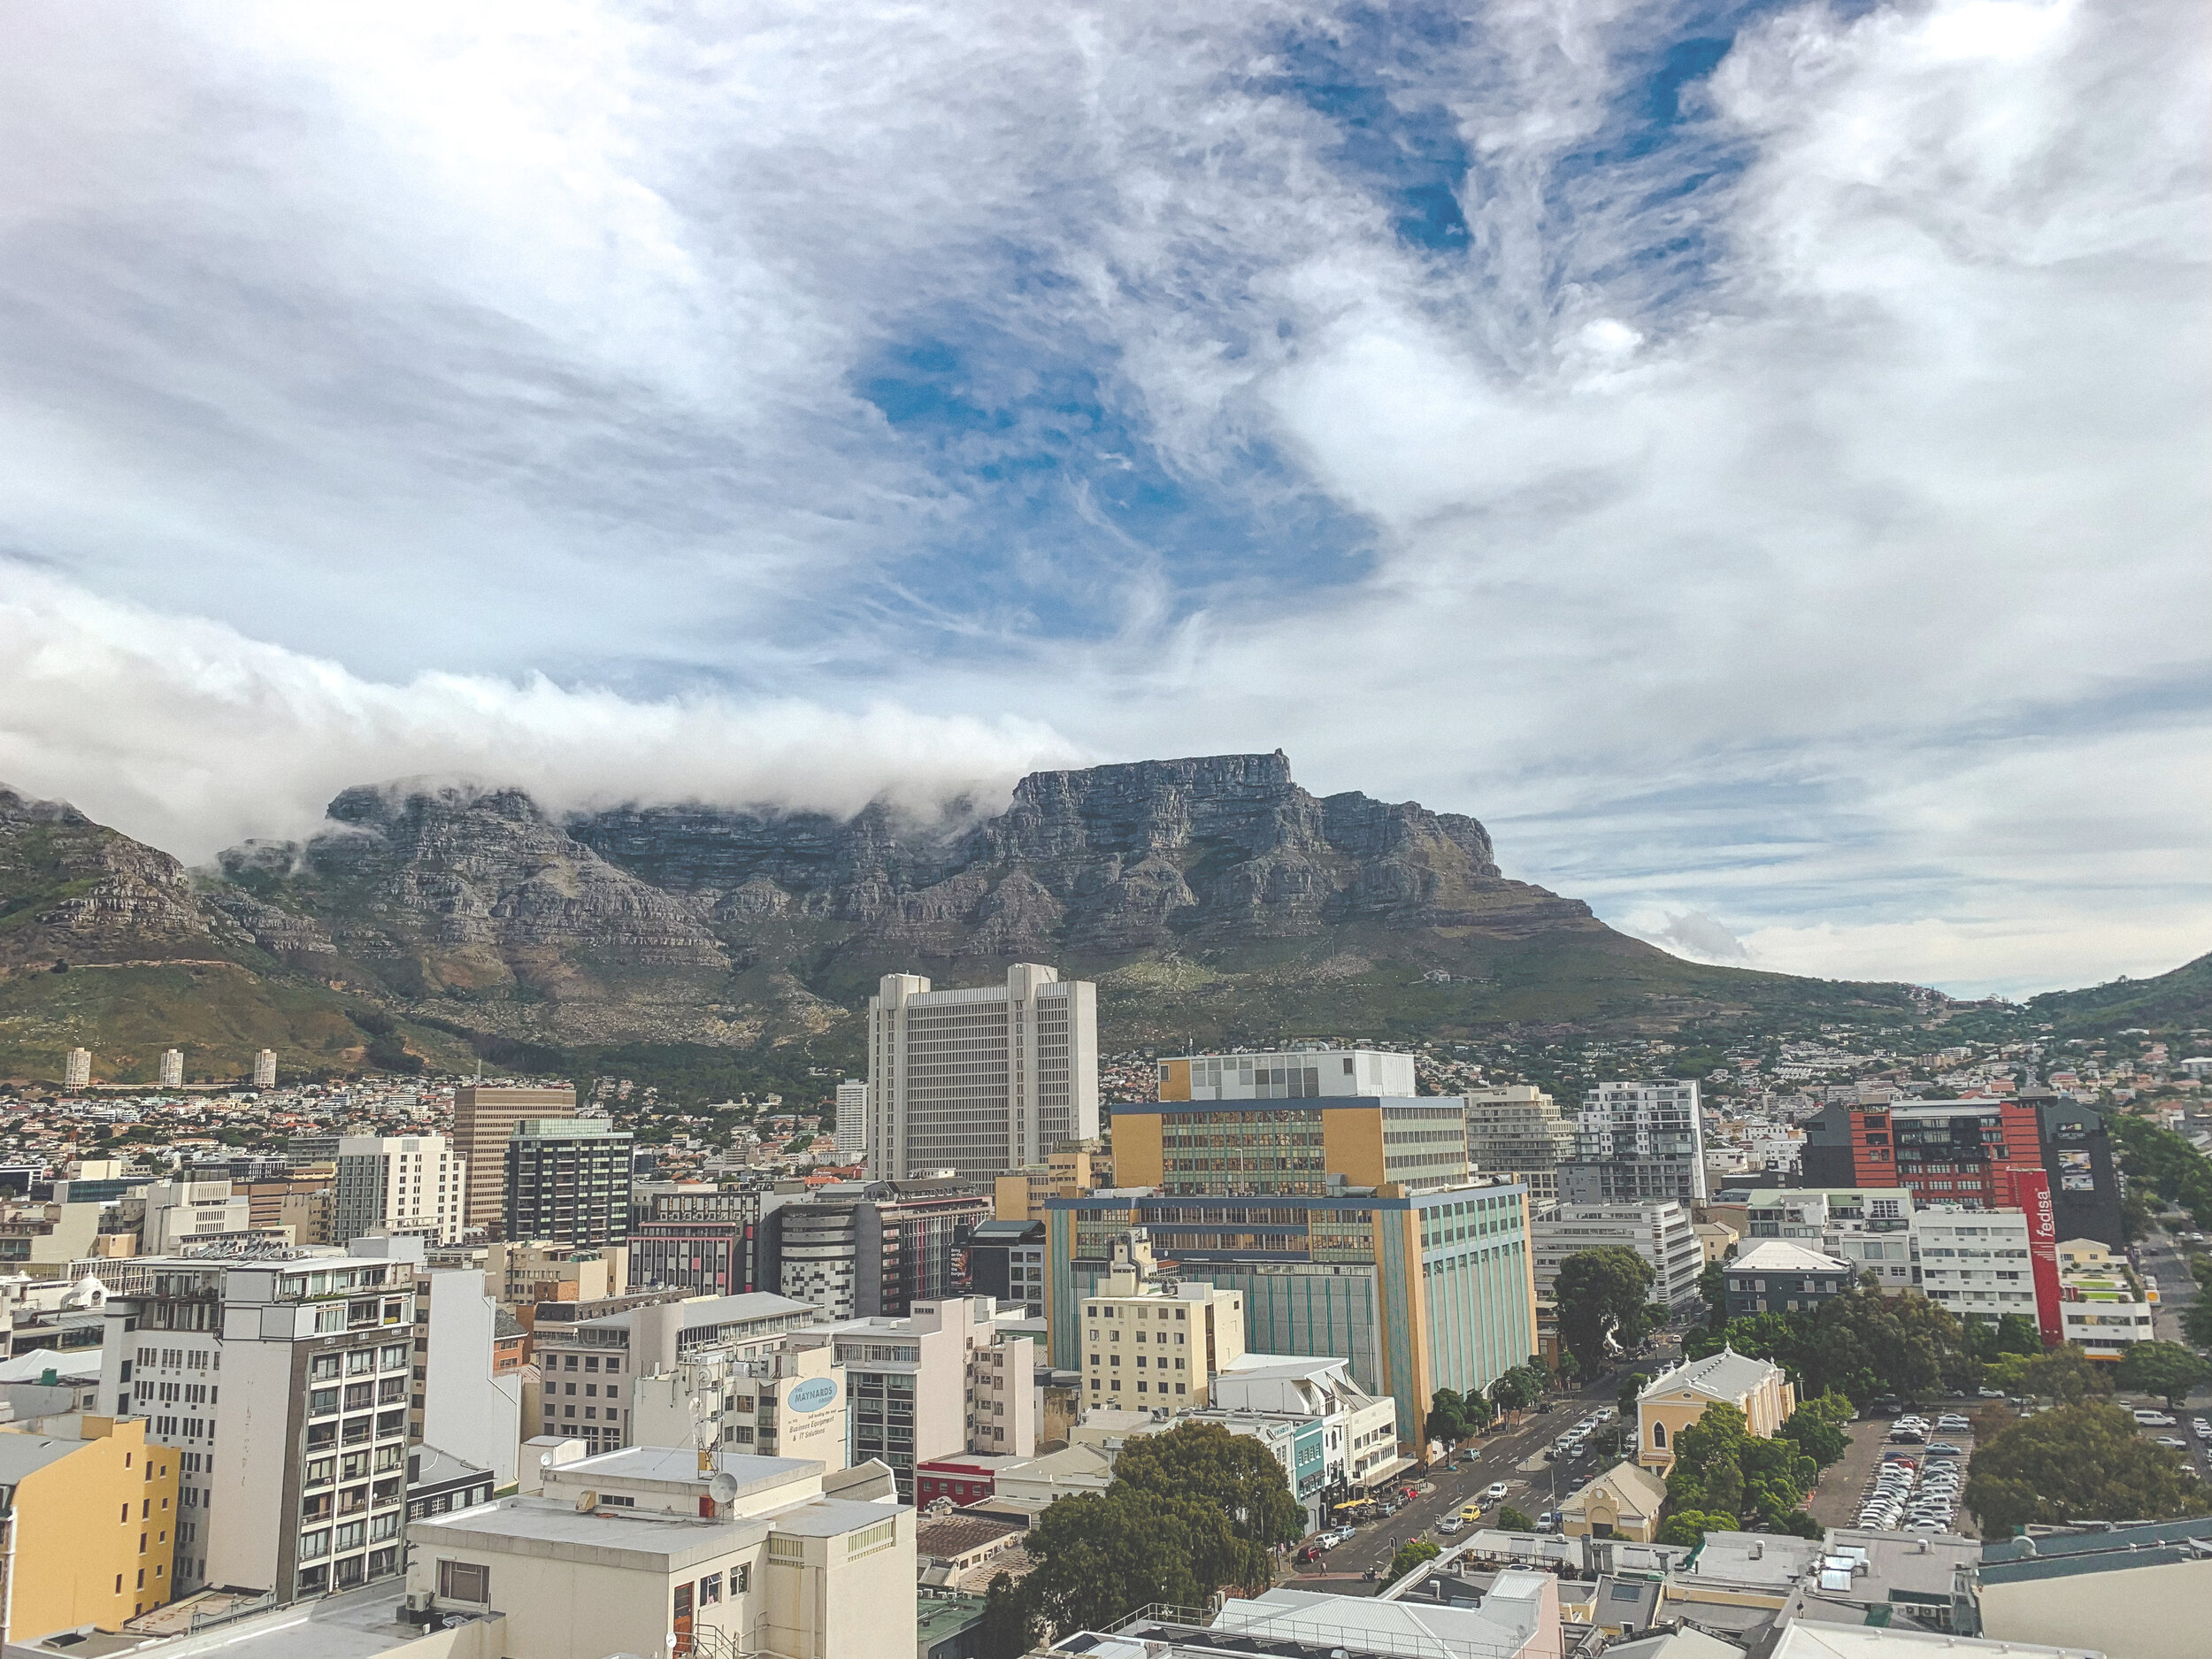 View of Table Mountain in Cape Town, South Africa